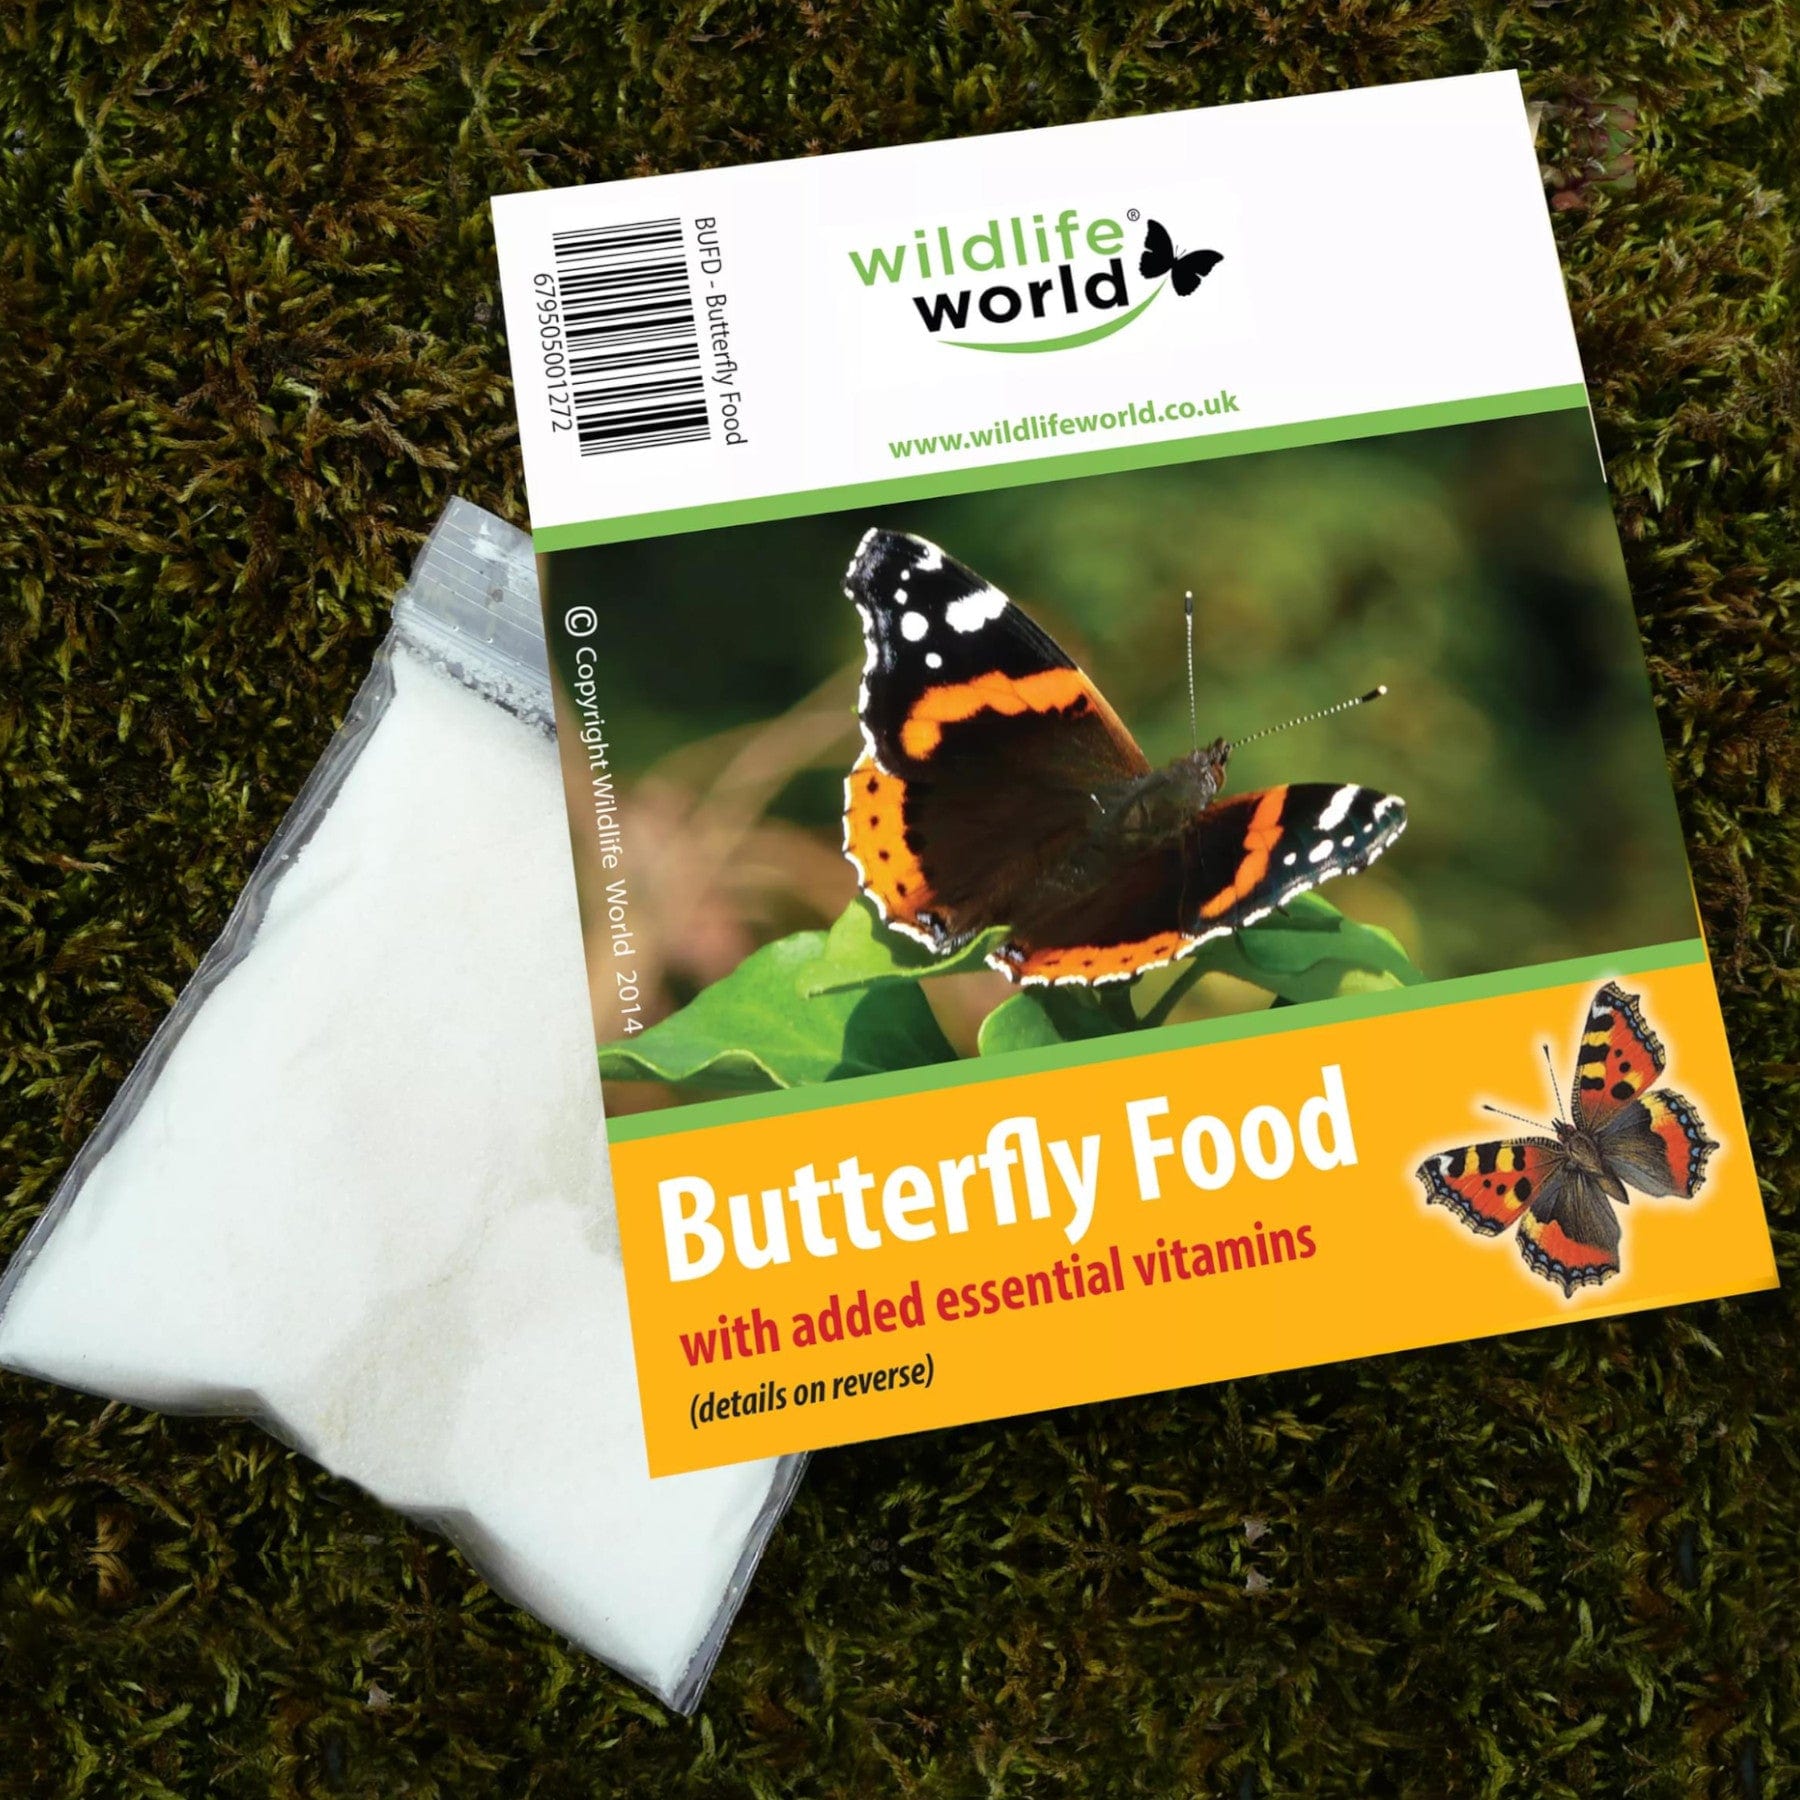 Butterfly Food packet from Wildlife World on mossy background, with image of Red Admiral butterfly, product bar code visible, essential vitamins mentioned.